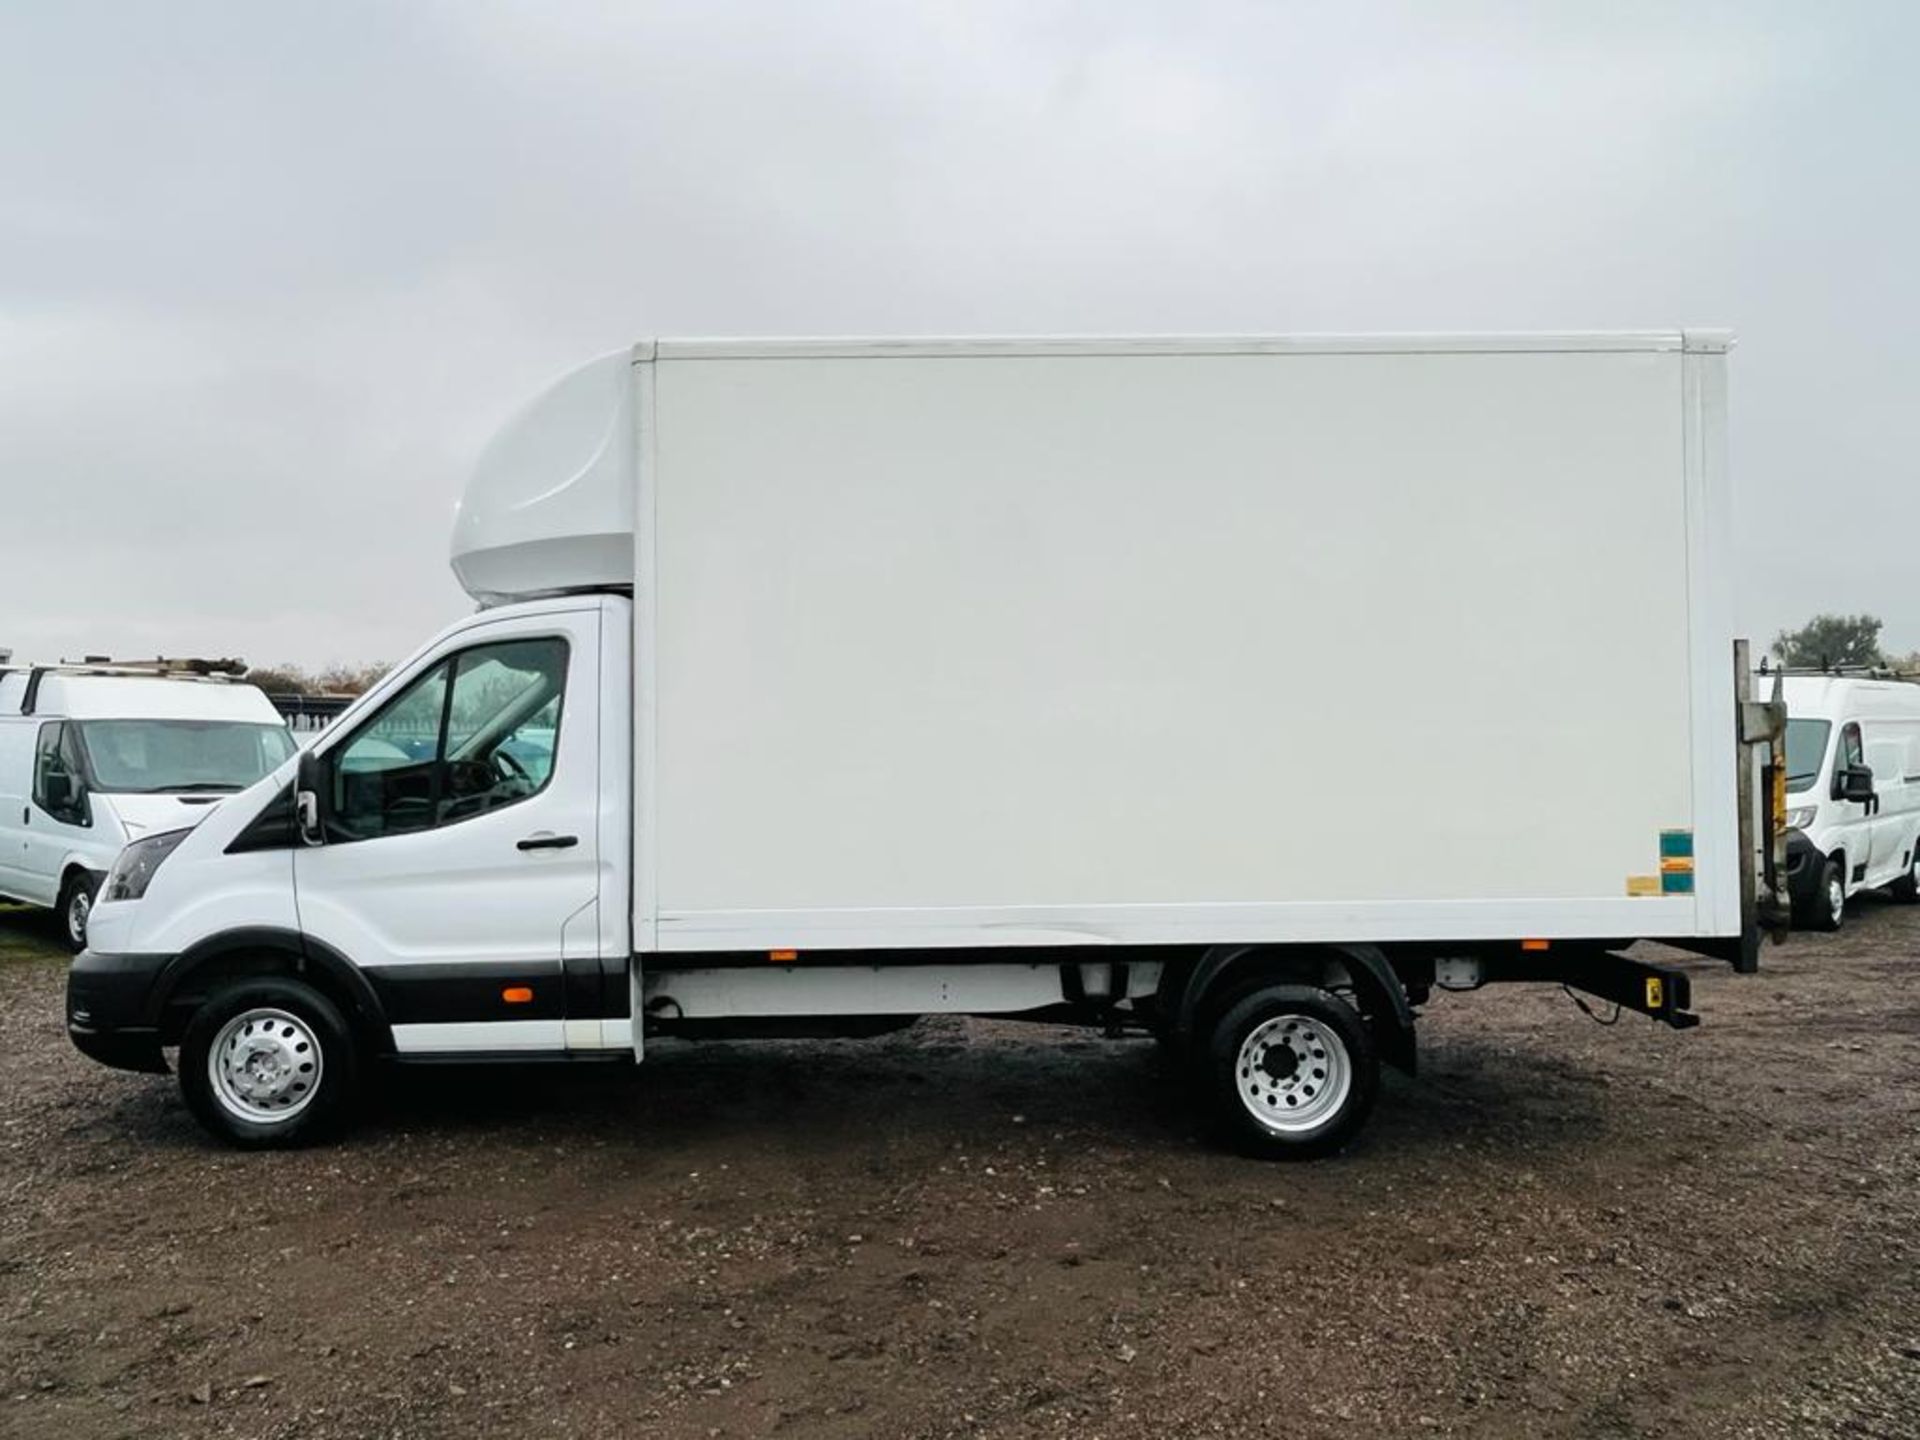 Ford Transit 2.0 EcoBlue 130 L3 Luton Body 2020 '20 Reg' ULEZ Compliant - ONLY 86,430 Miles - Image 4 of 26